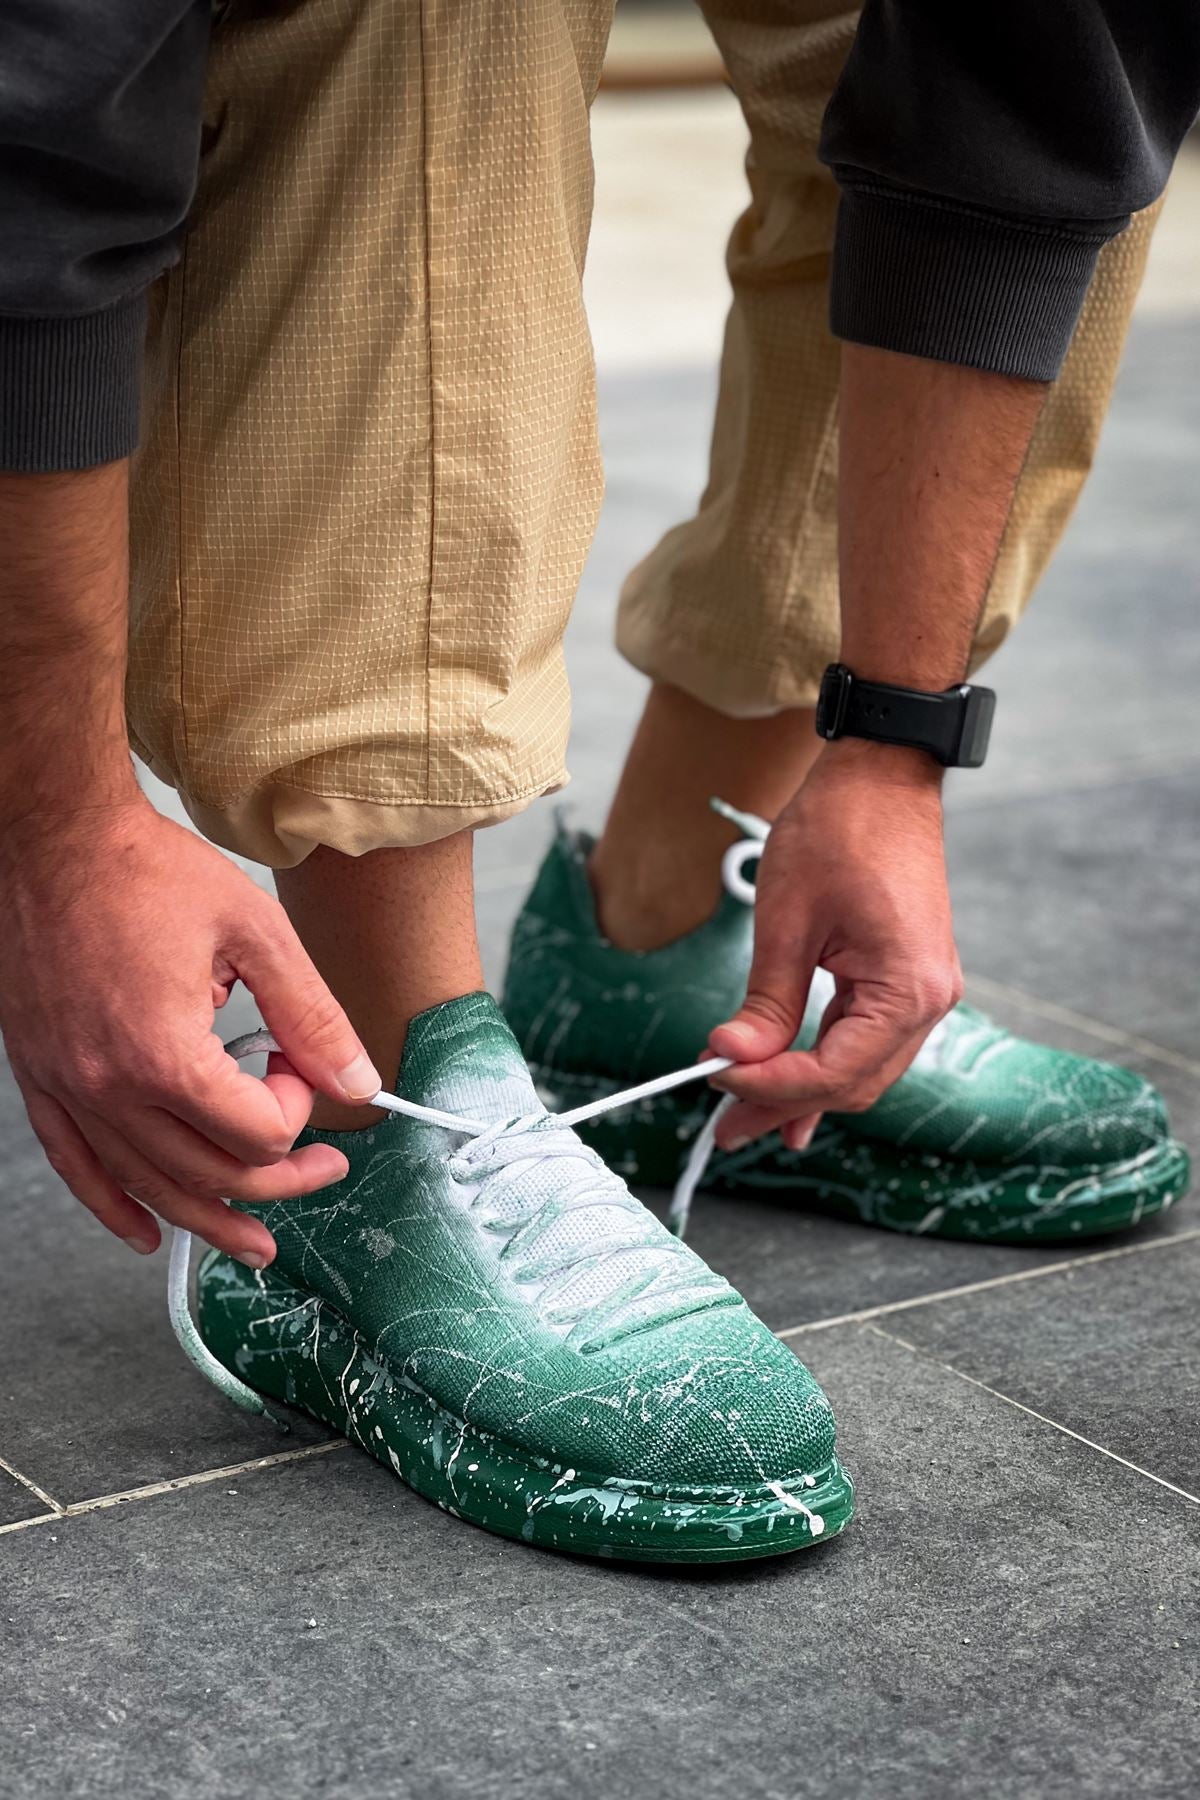 CH307 Colorful Tricot Men's Shoes Green Splush - STREETMODE™